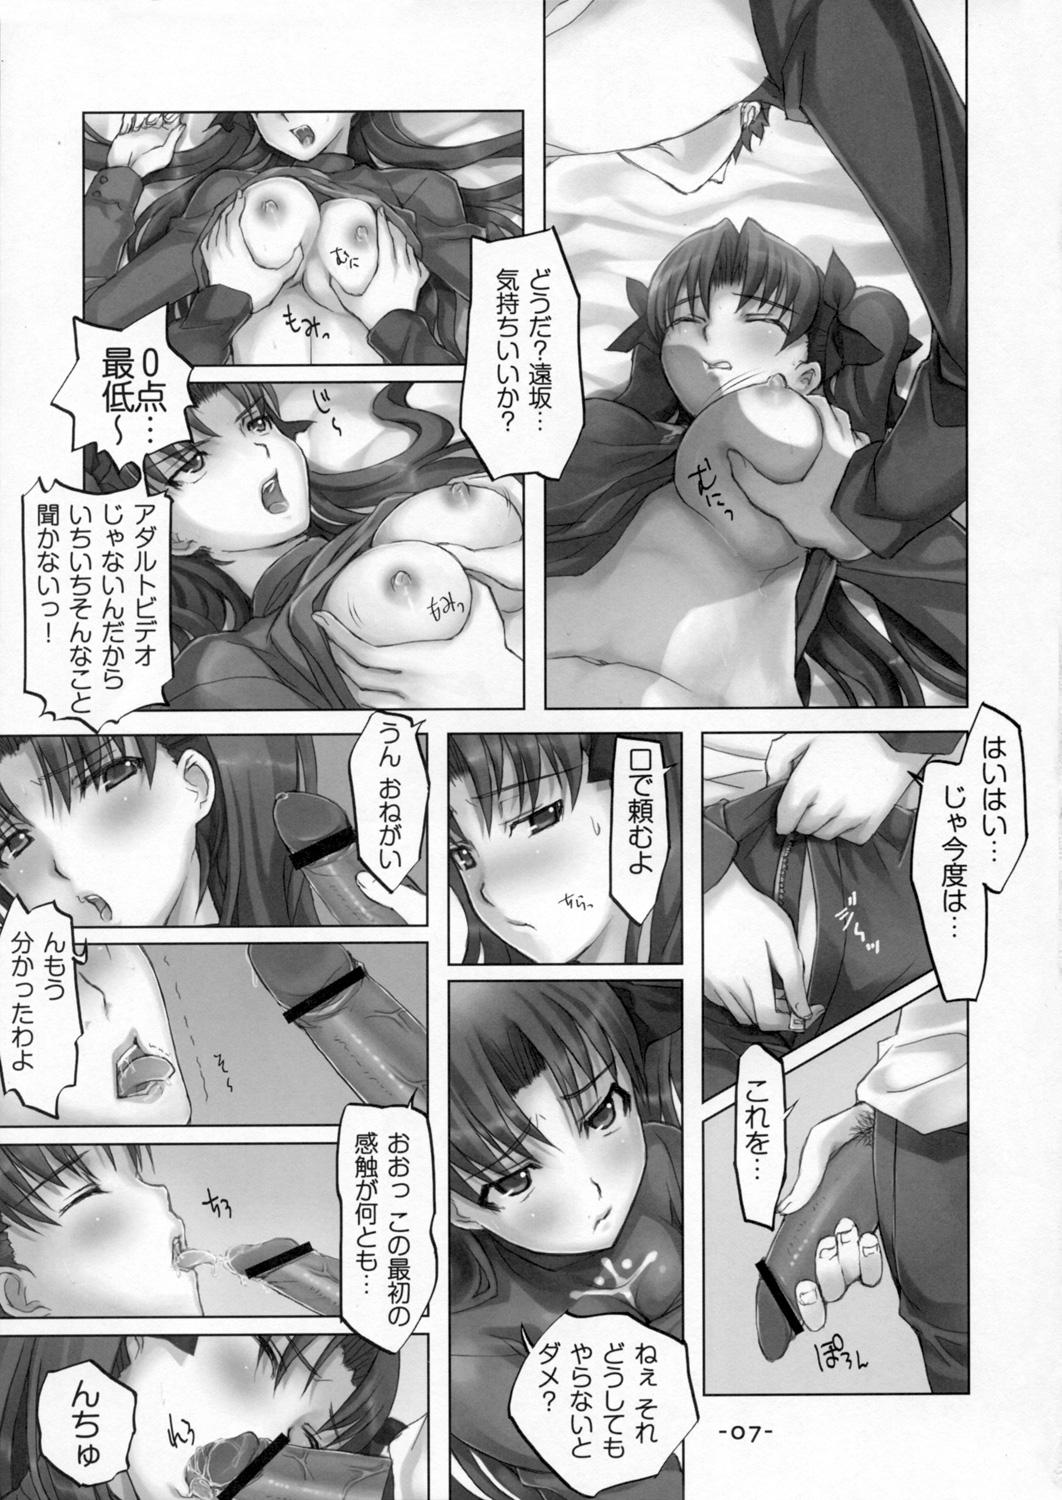 Shaved DAILY LIFE - Fate stay night Fate hollow ataraxia Amatures Gone Wild - Page 6